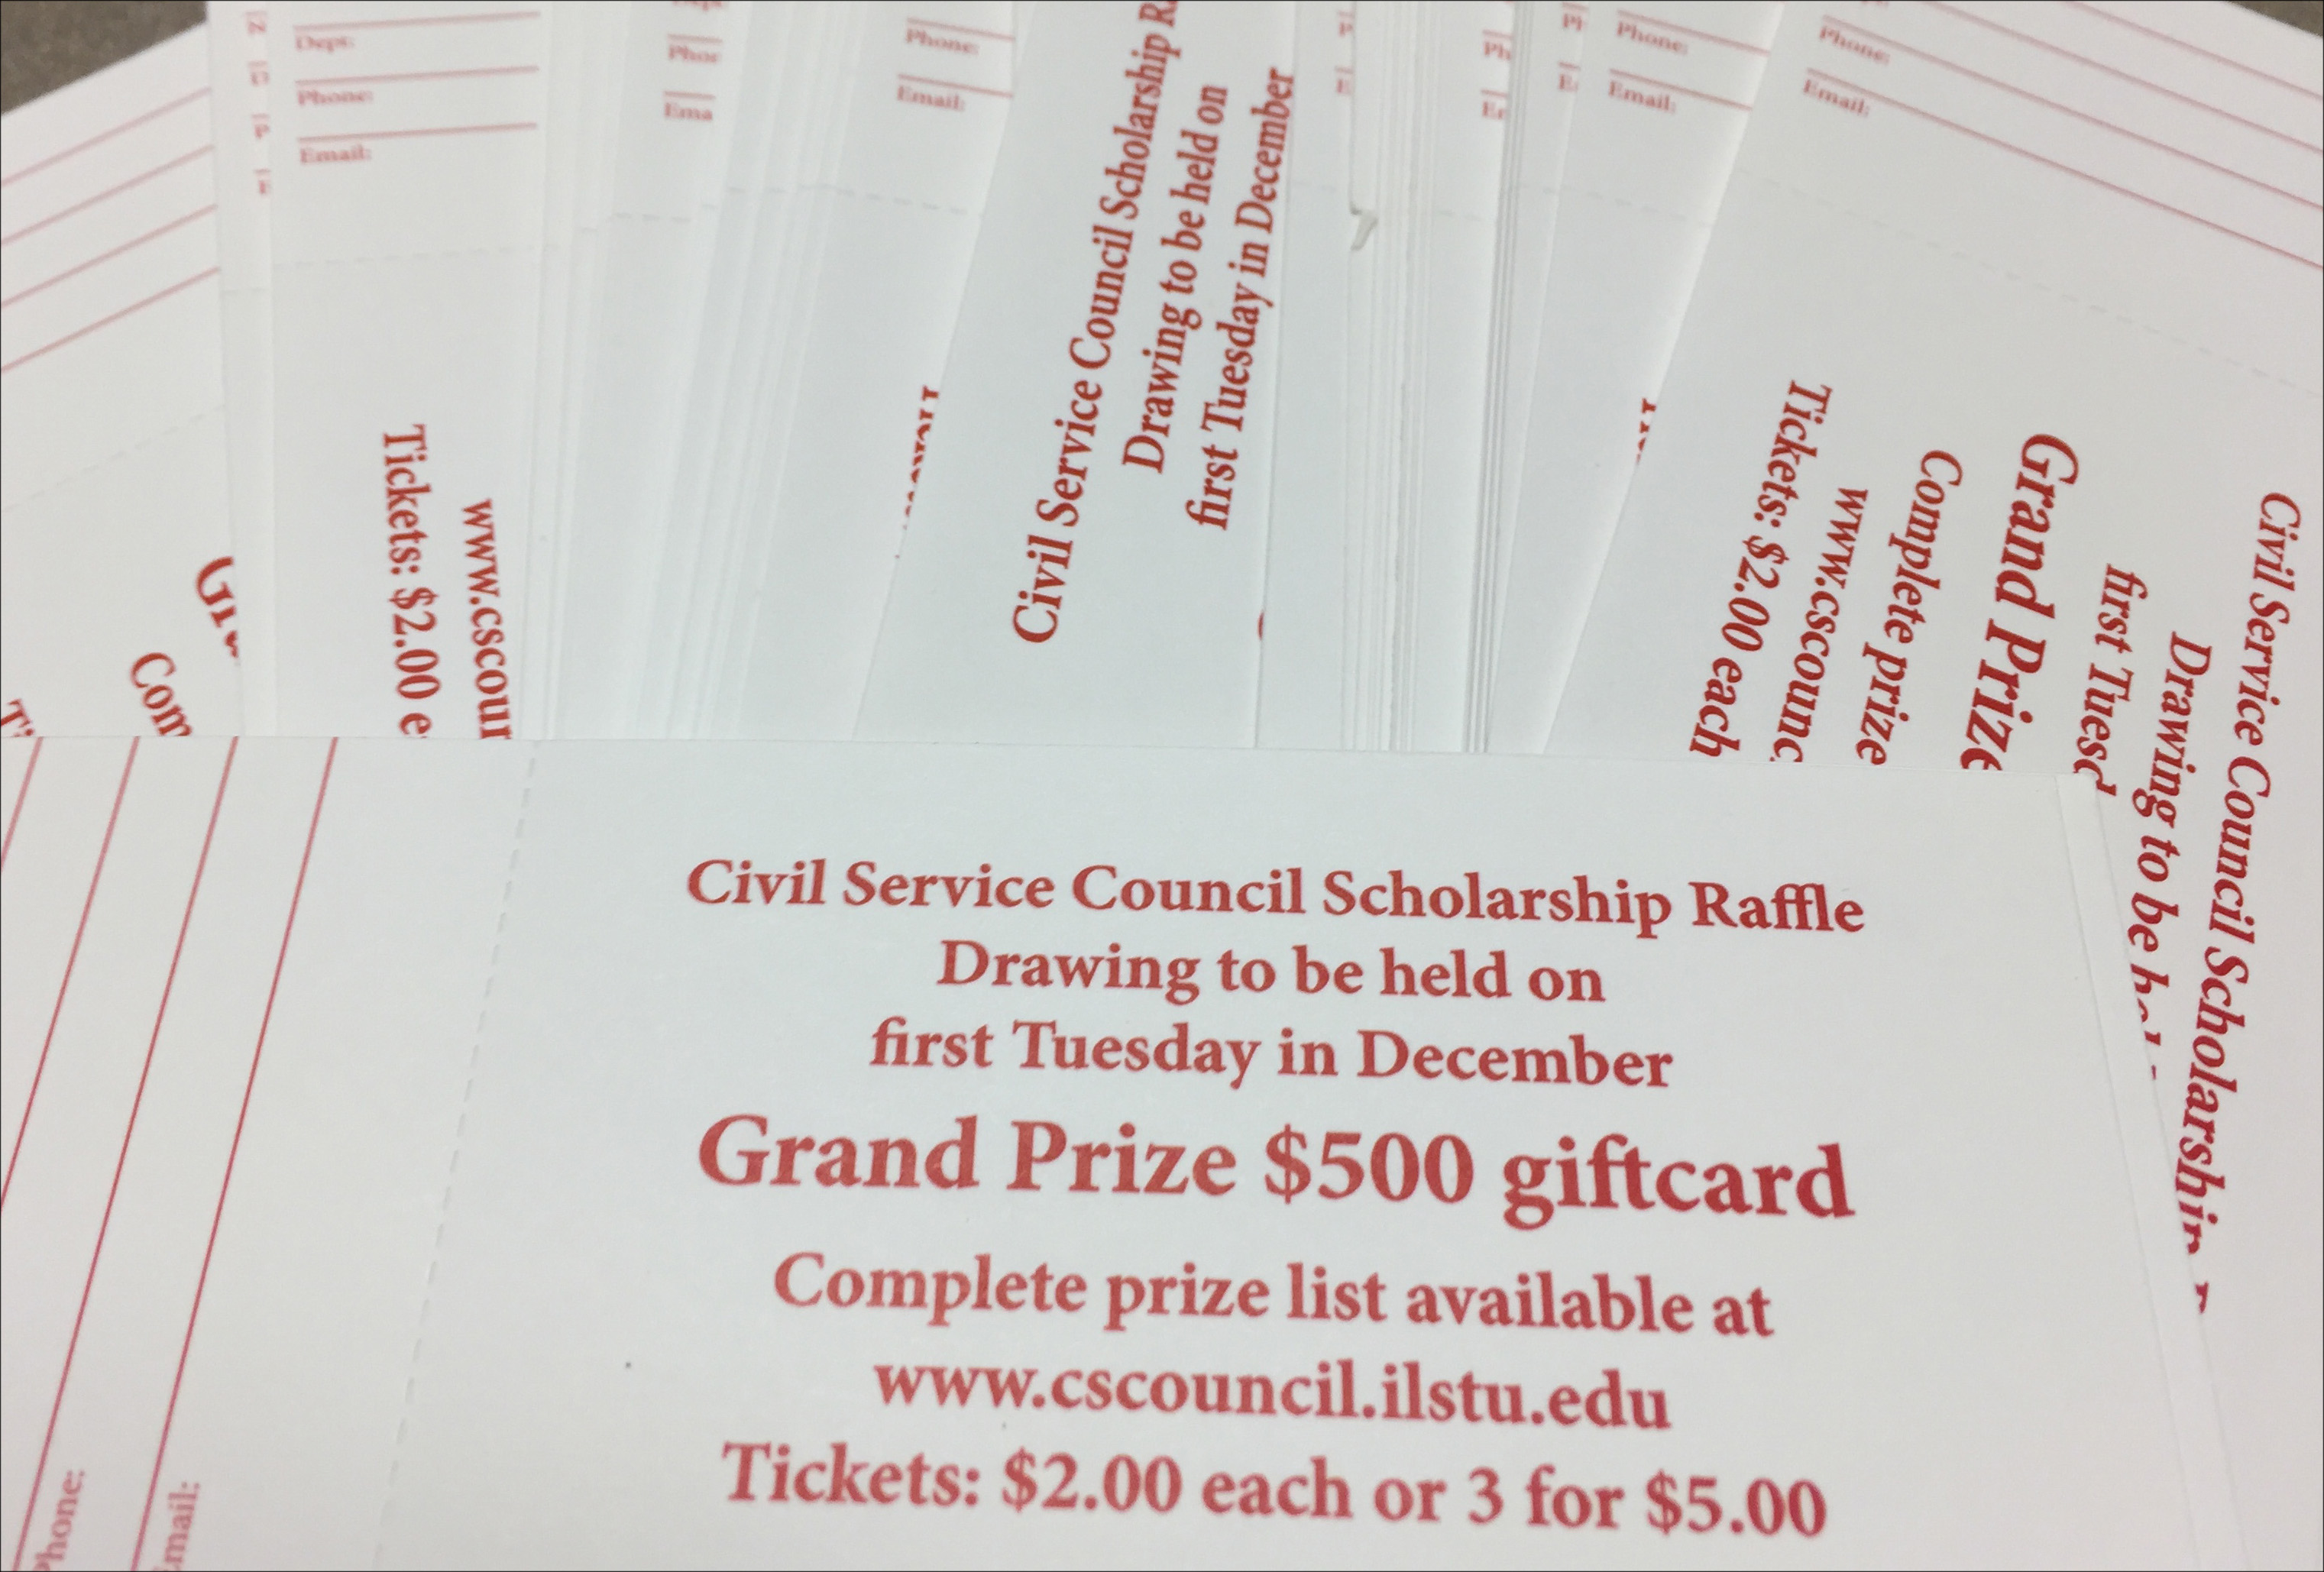 stack of raffle tickets with the words Civil Service Council Scholarship Raffle, drawing to be held on first Tuesday in December, Grand Prize $500 gift card, Complete prize list available at www.cscouncil.ilstu.edu, tickets $2 each or 3 for $5.